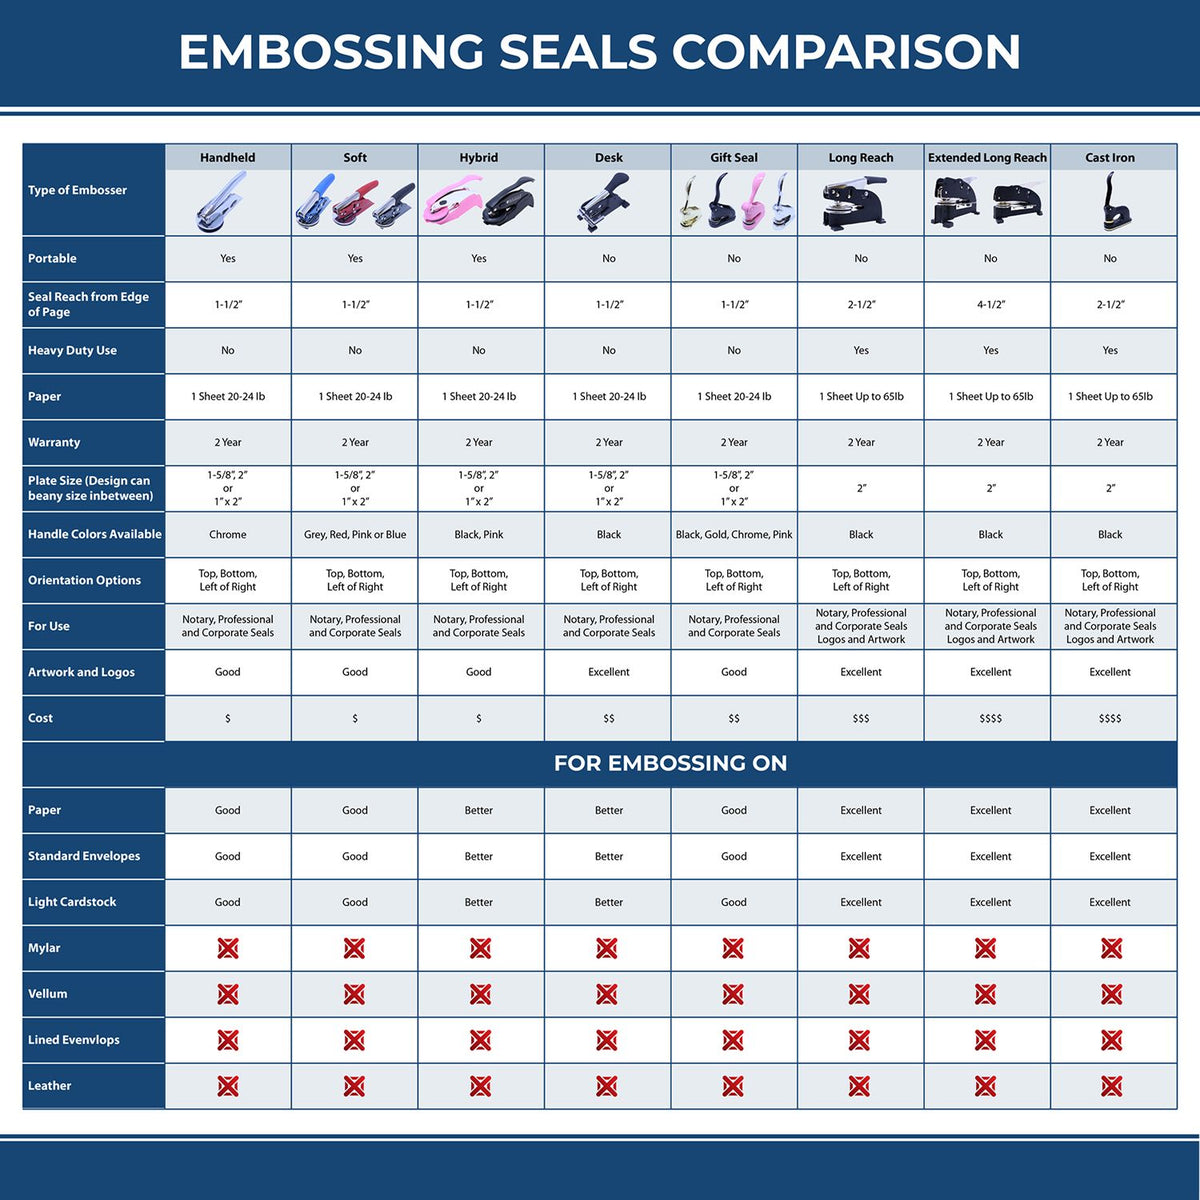 A comparison chart for the different types of mount models available for the Hybrid Pennsylvania Engineer Seal